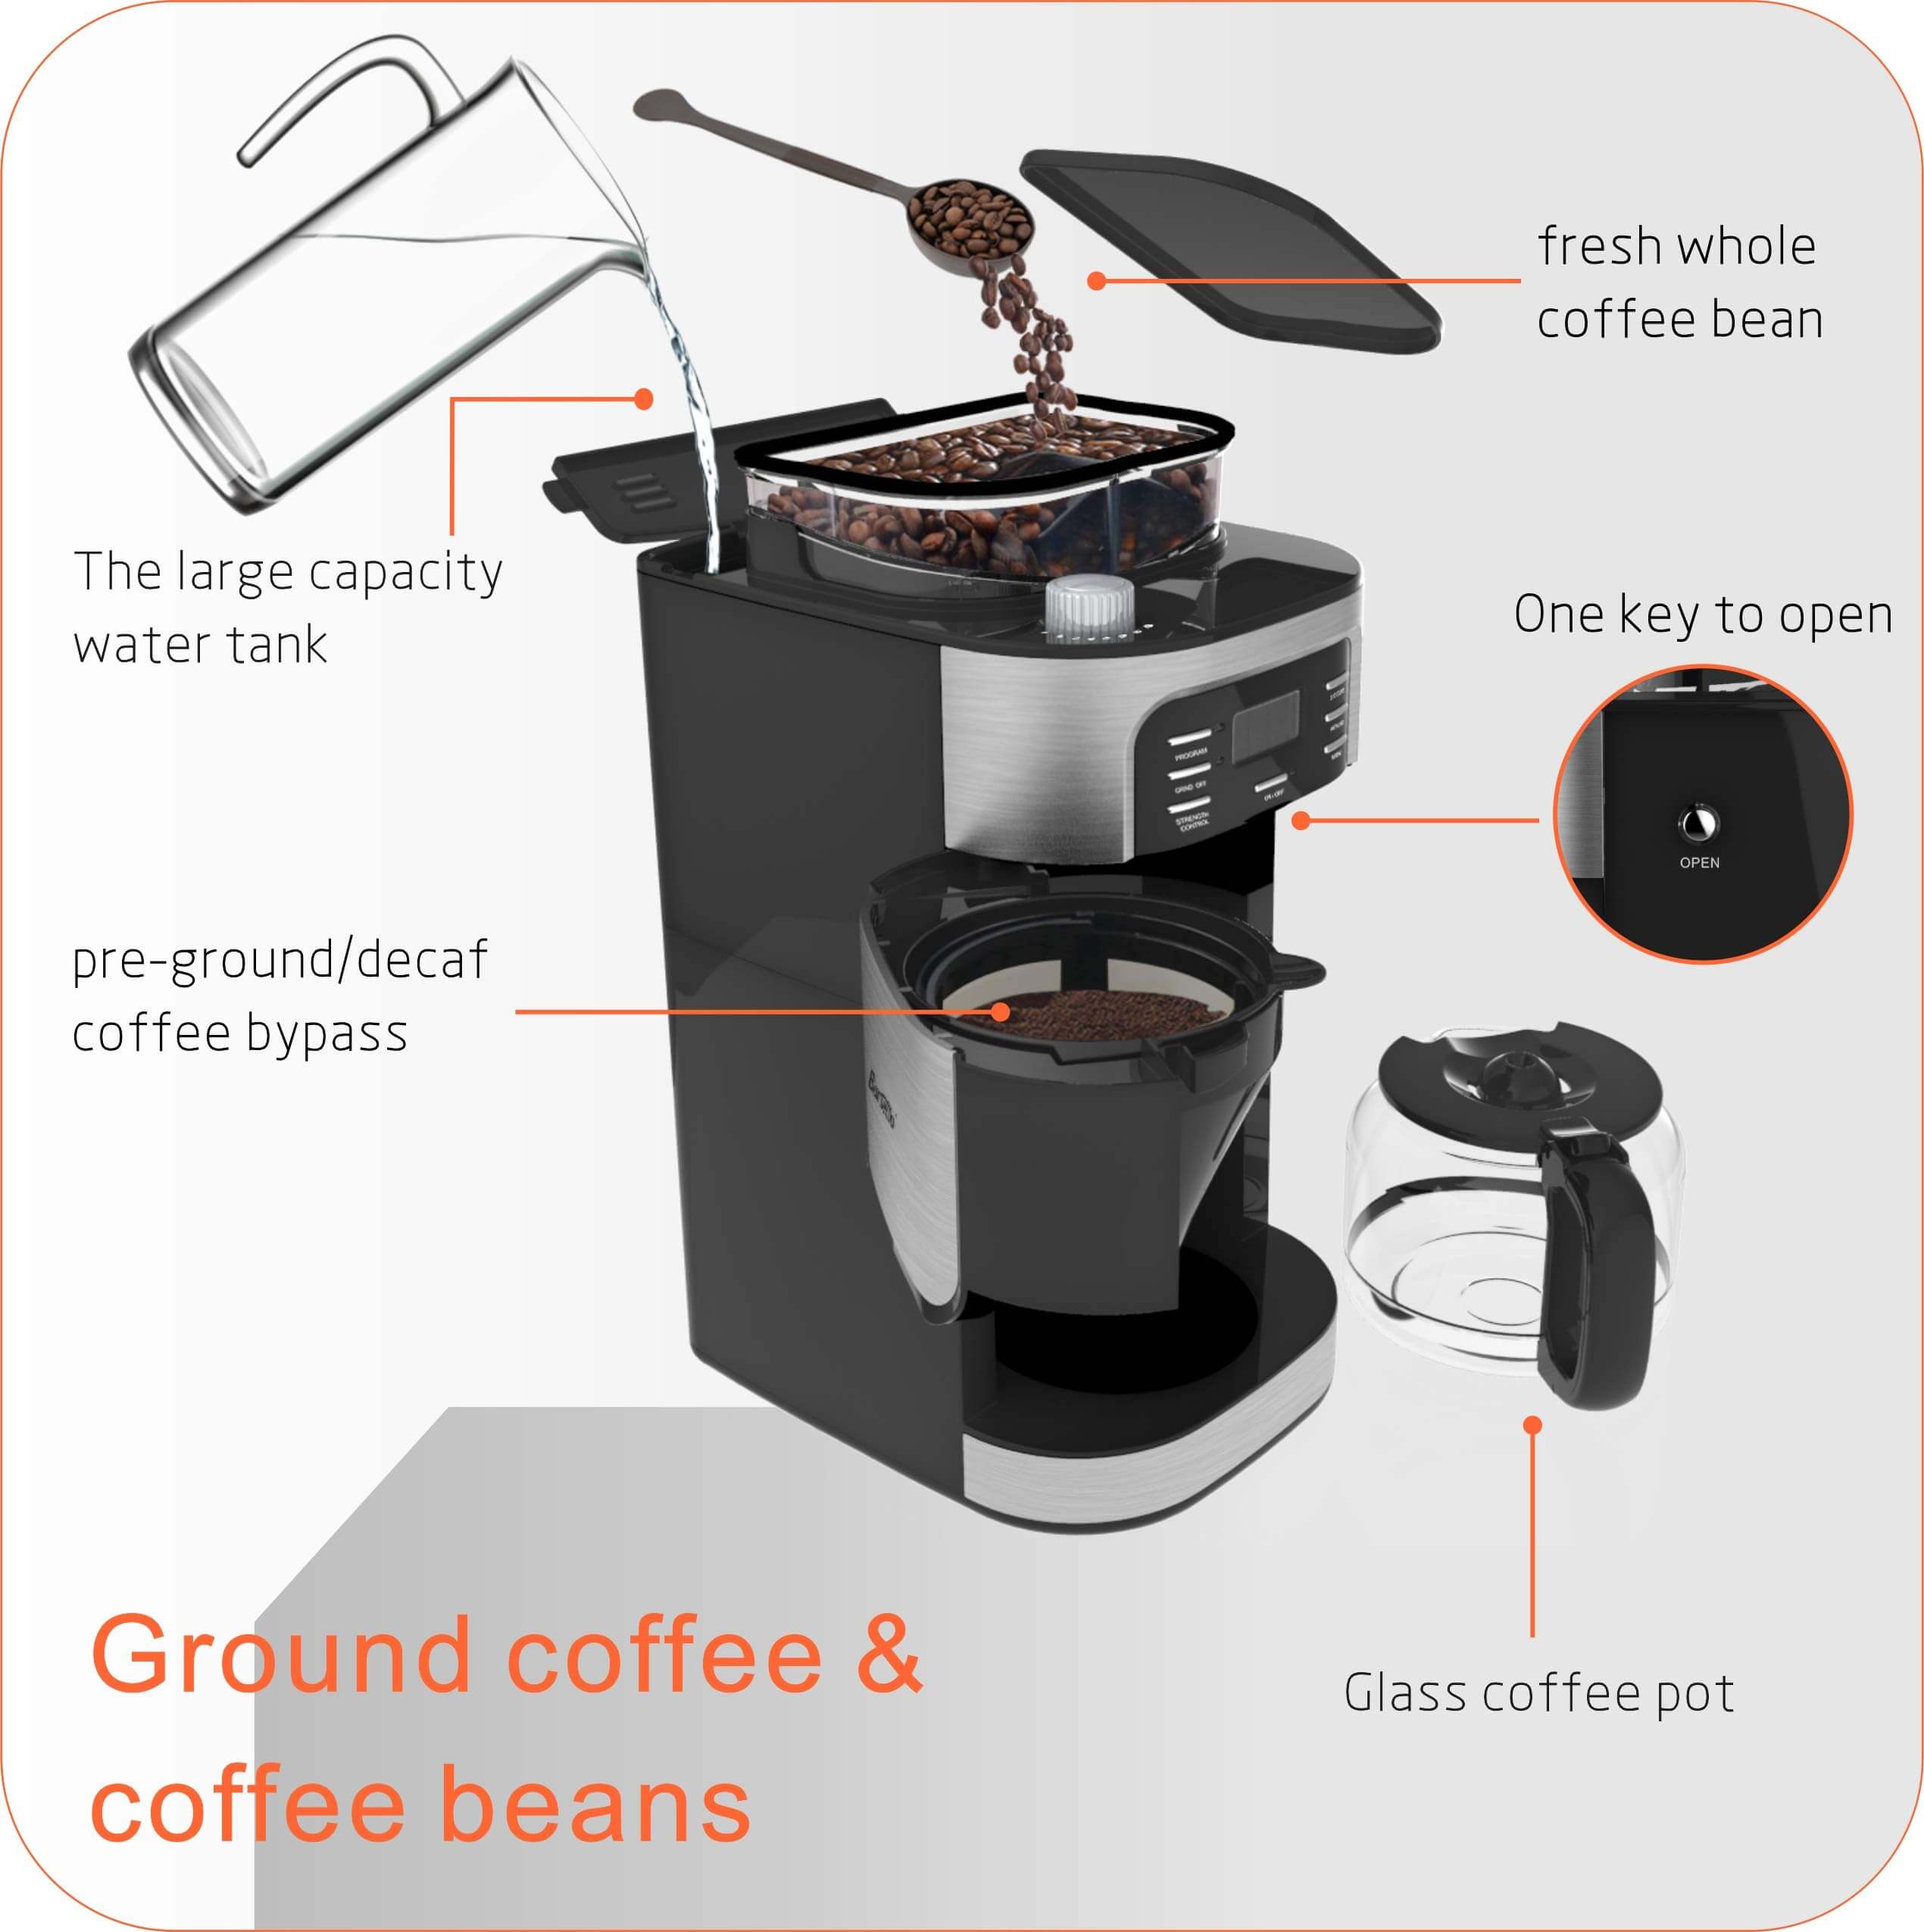 best coffee maker with grinder, Barsetto Automatic Grind and Brew Coffee Maker, best grind and brew coffee maker, best coffee maker with grinder 2020